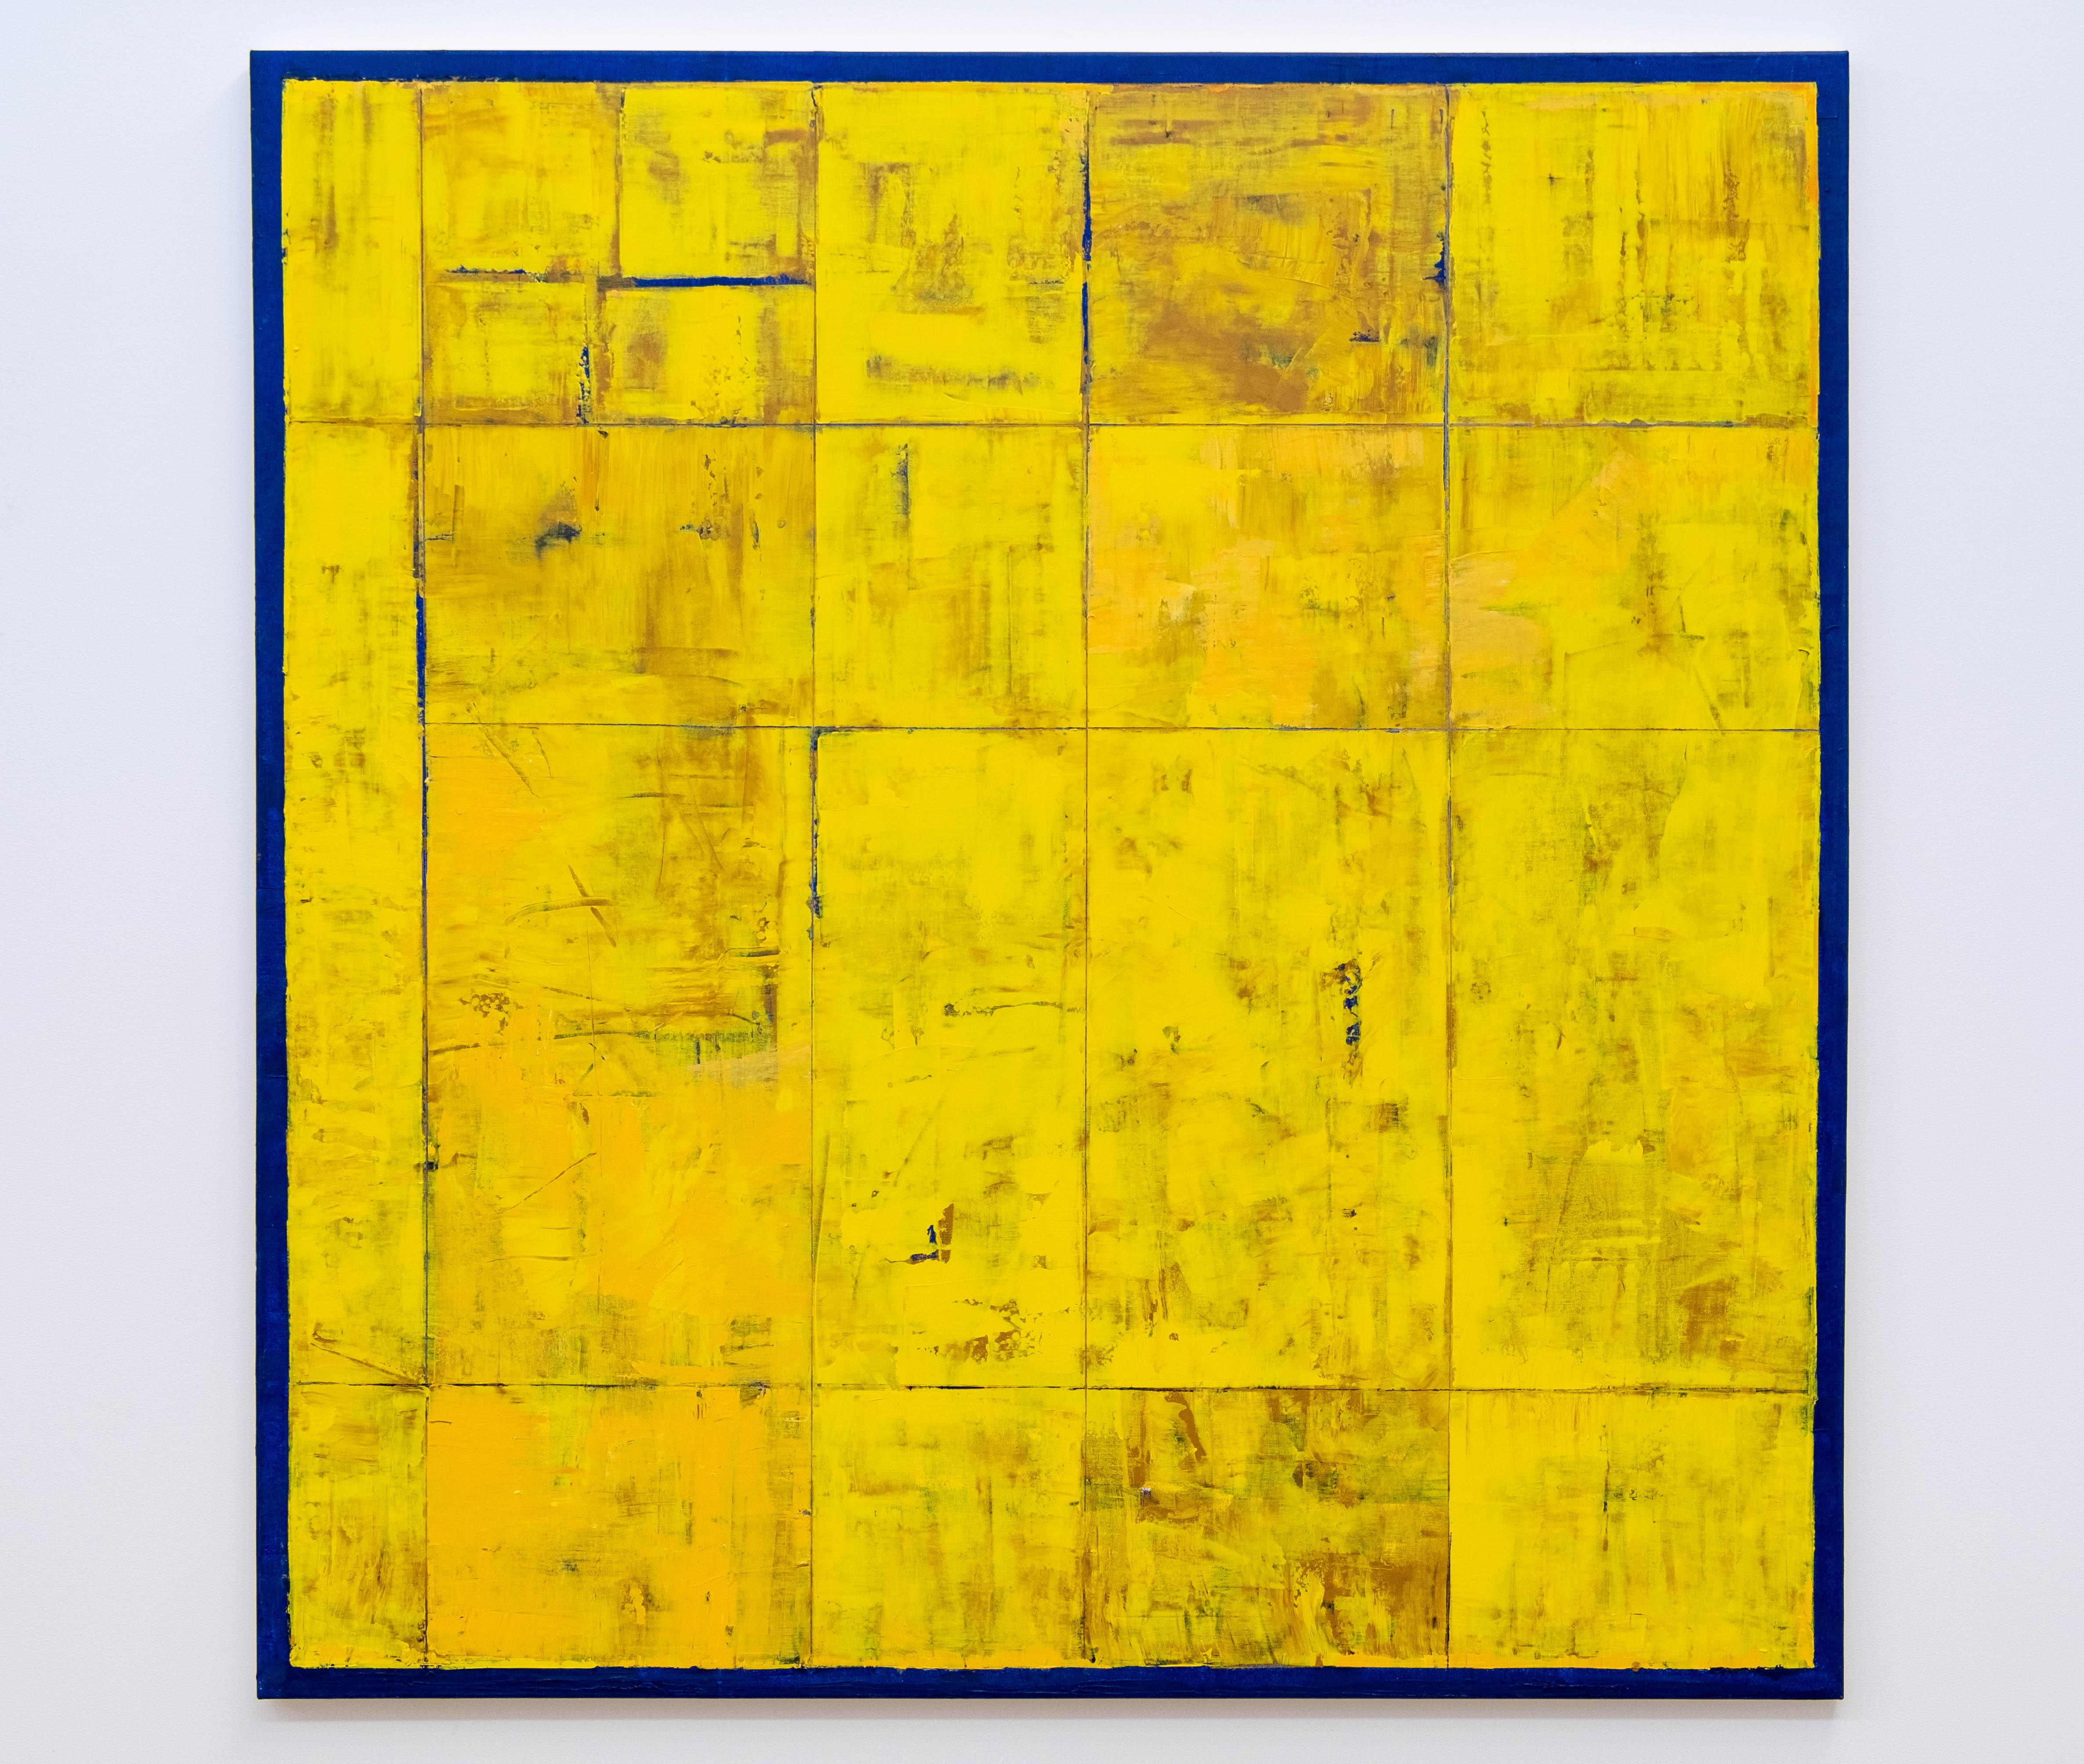 Amida - large, bright, colorful, yellow, abstract grid, modernist, oil on canvas - Painting by David Sorensen